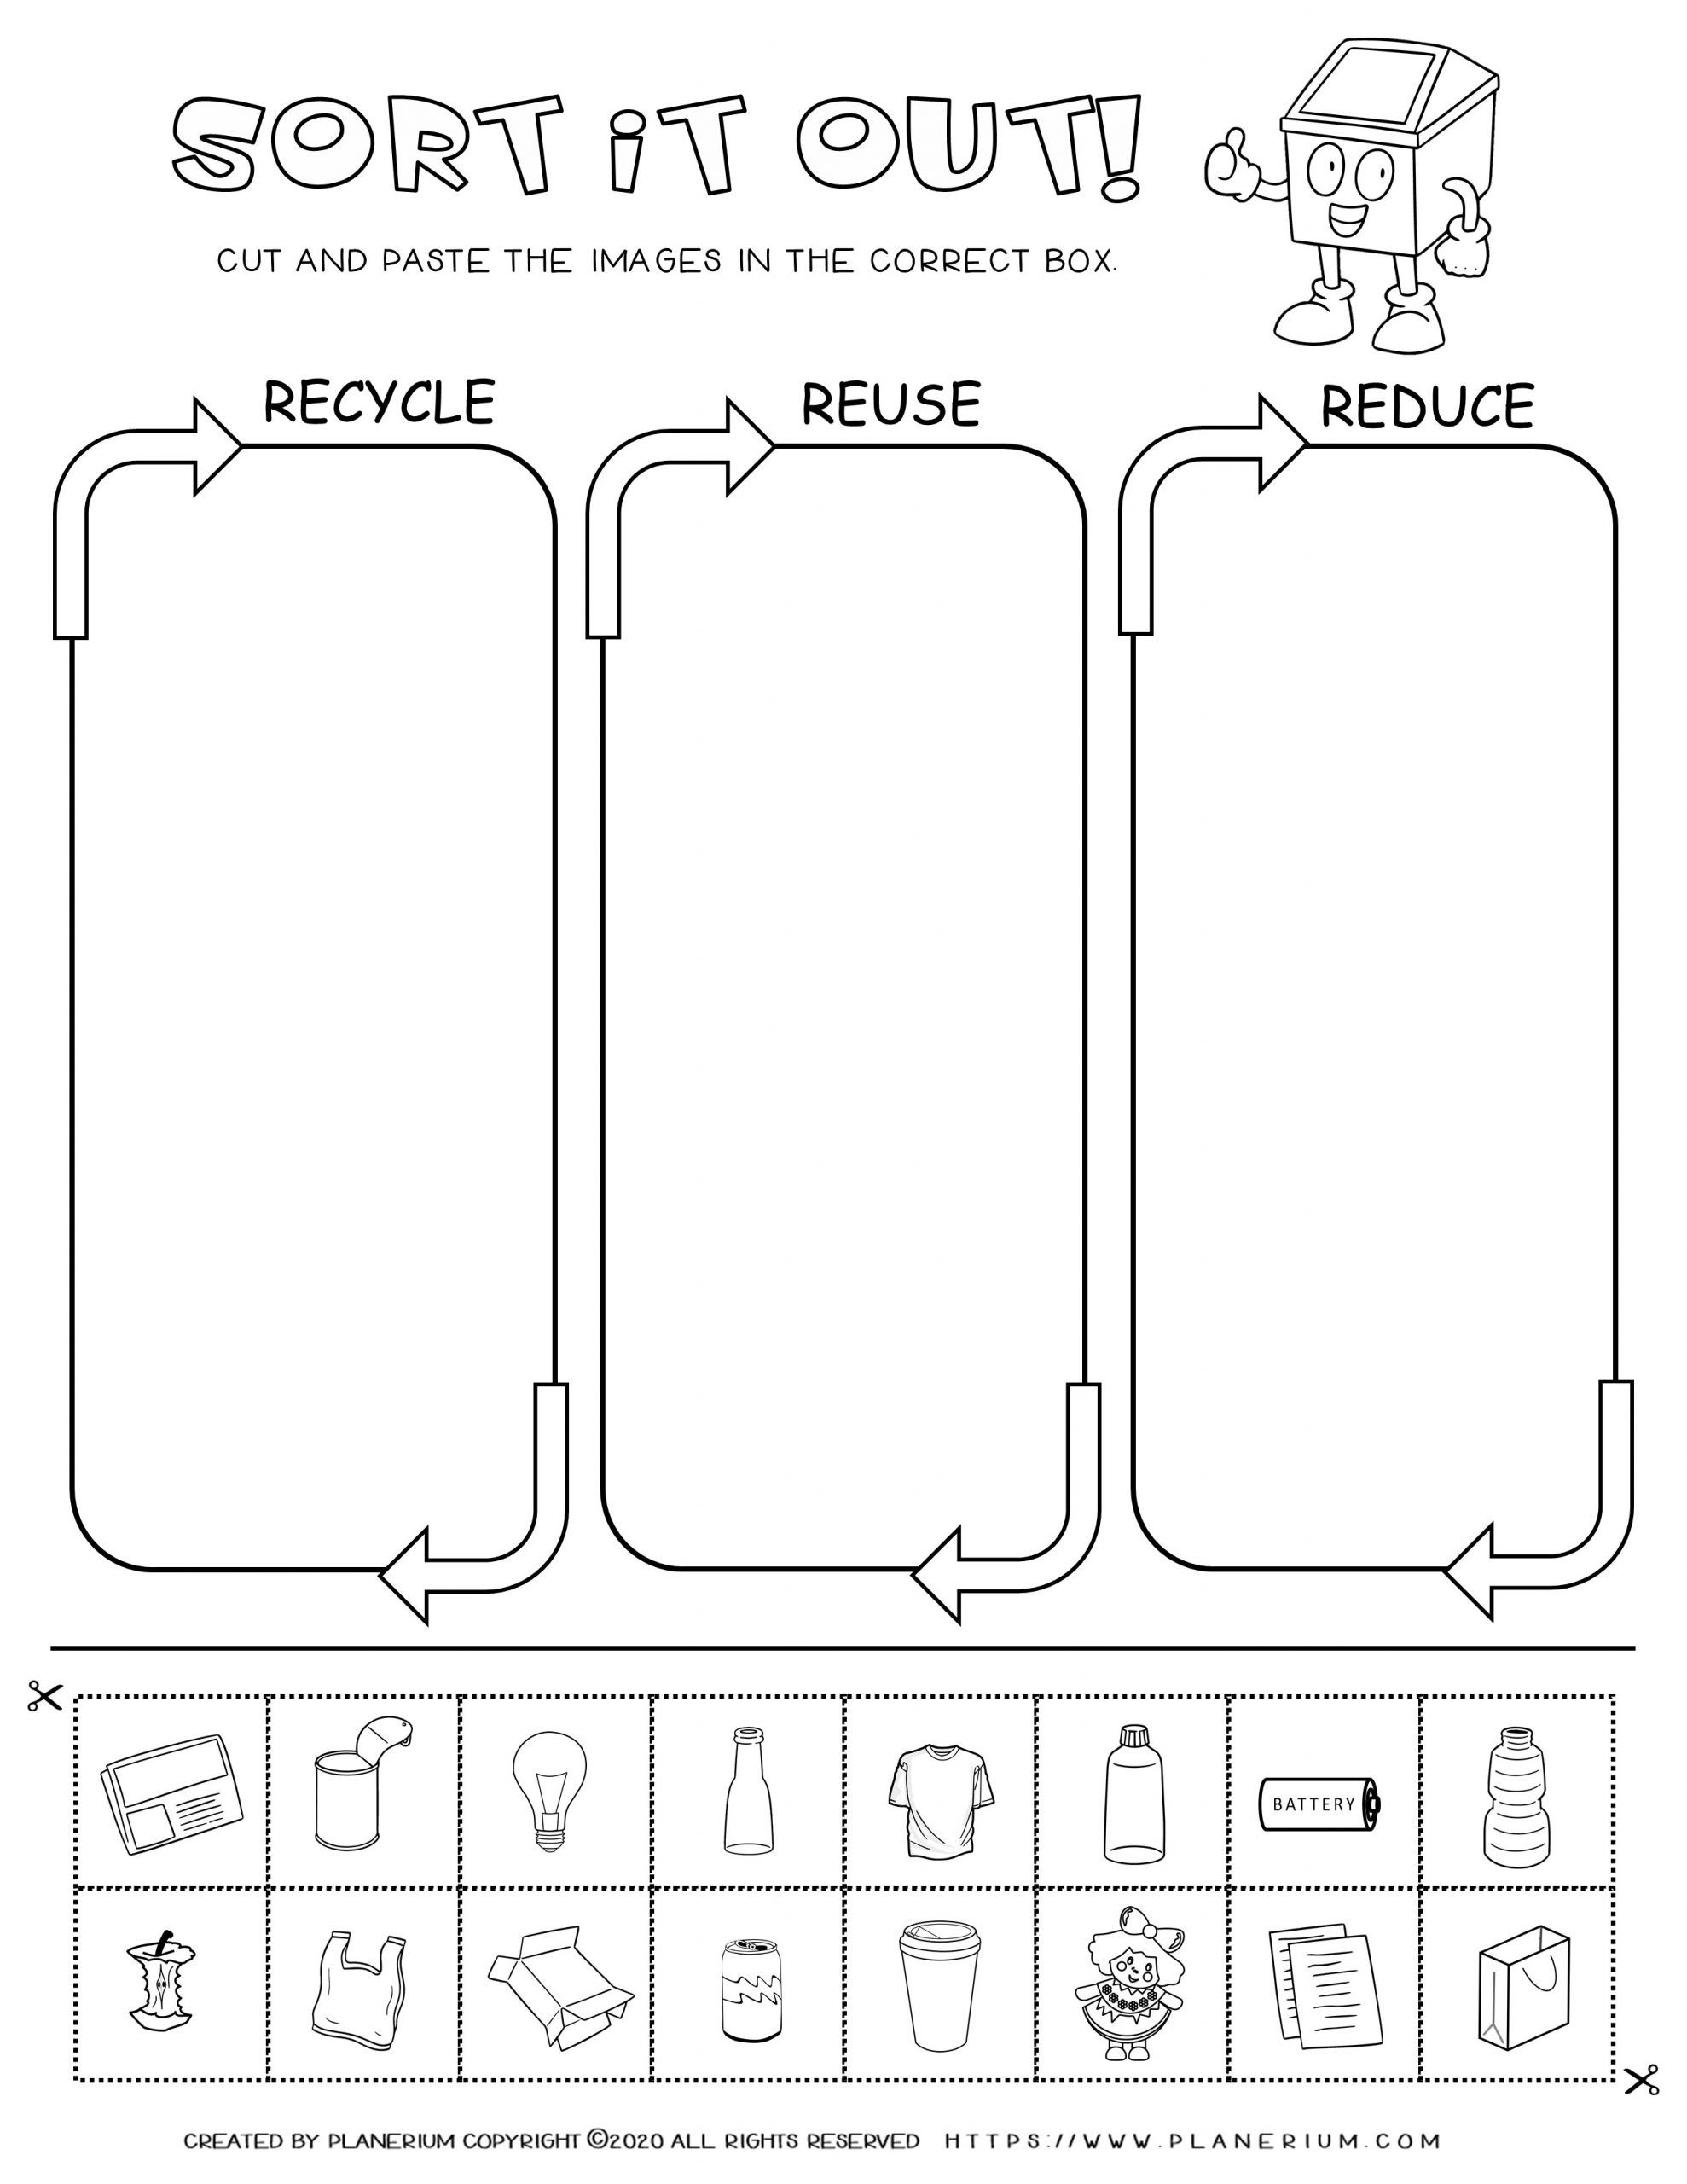 earth-day-worksheet-sorting-recycled-items-planerium